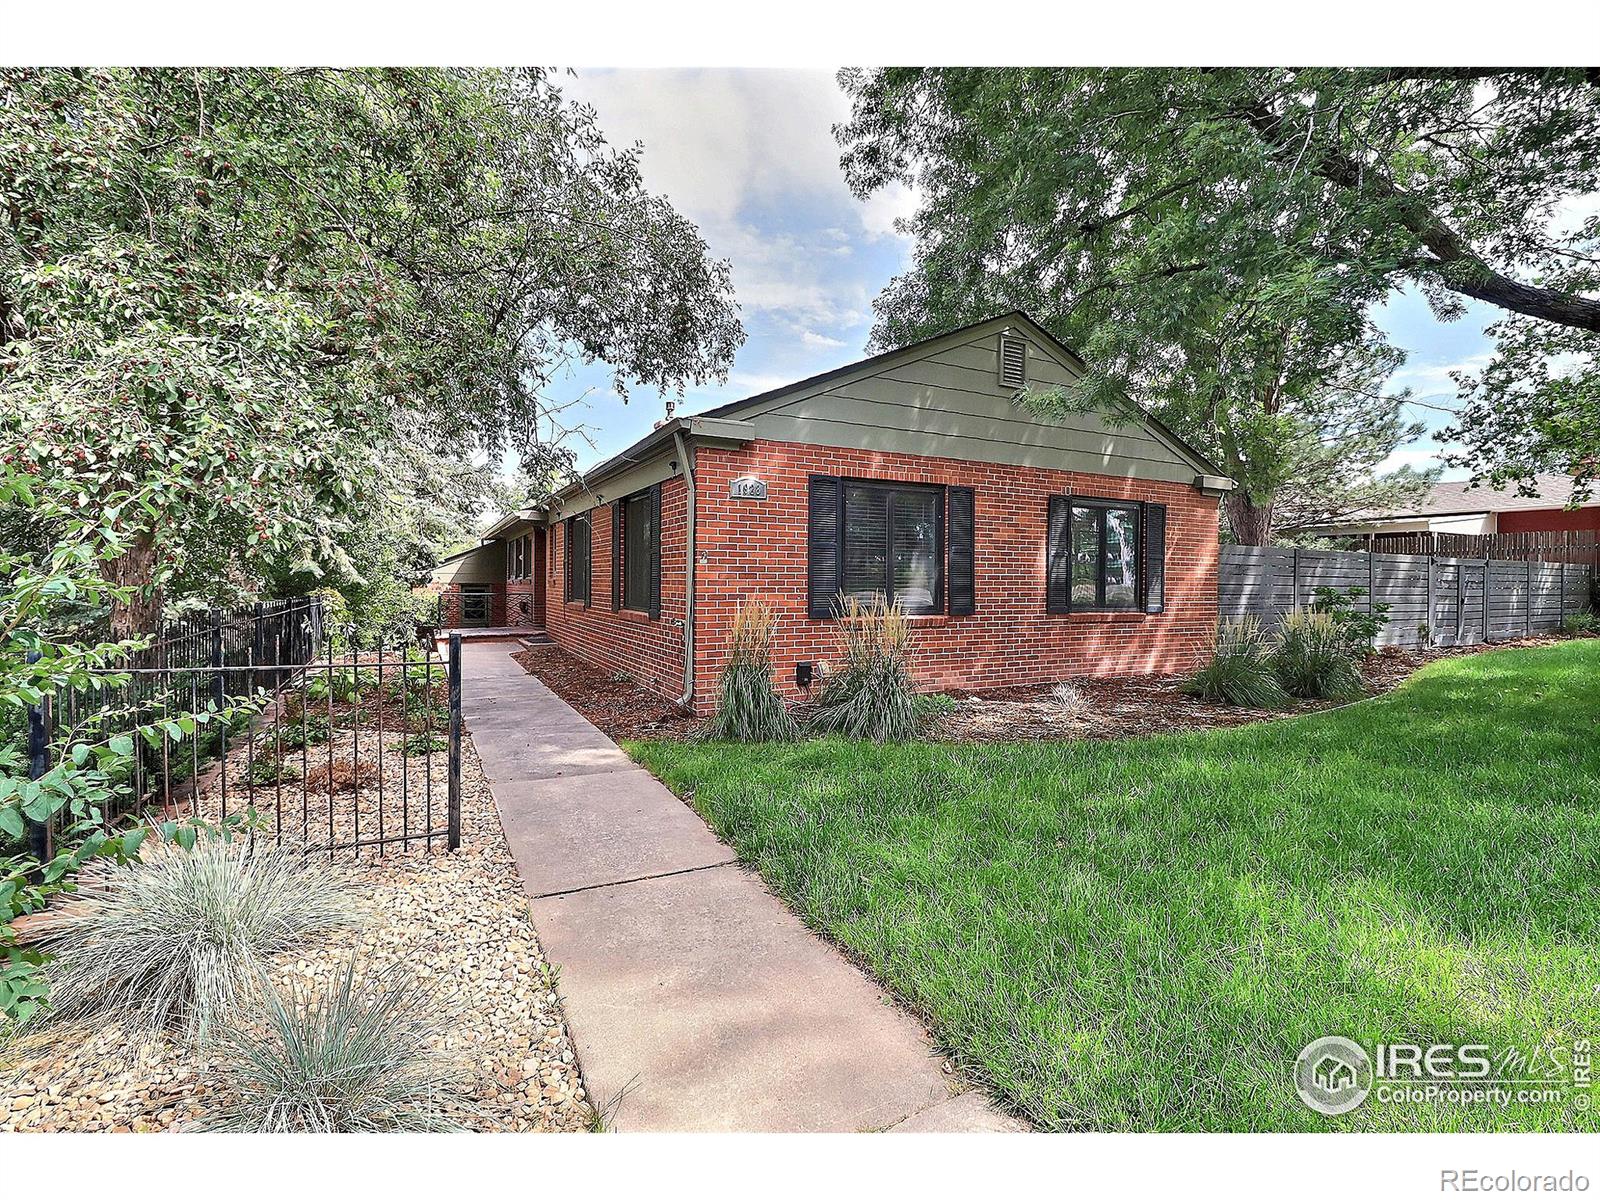 1928  14th Avenue, greeley MLS: 123456789995411 Beds: 5 Baths: 3 Price: $530,000